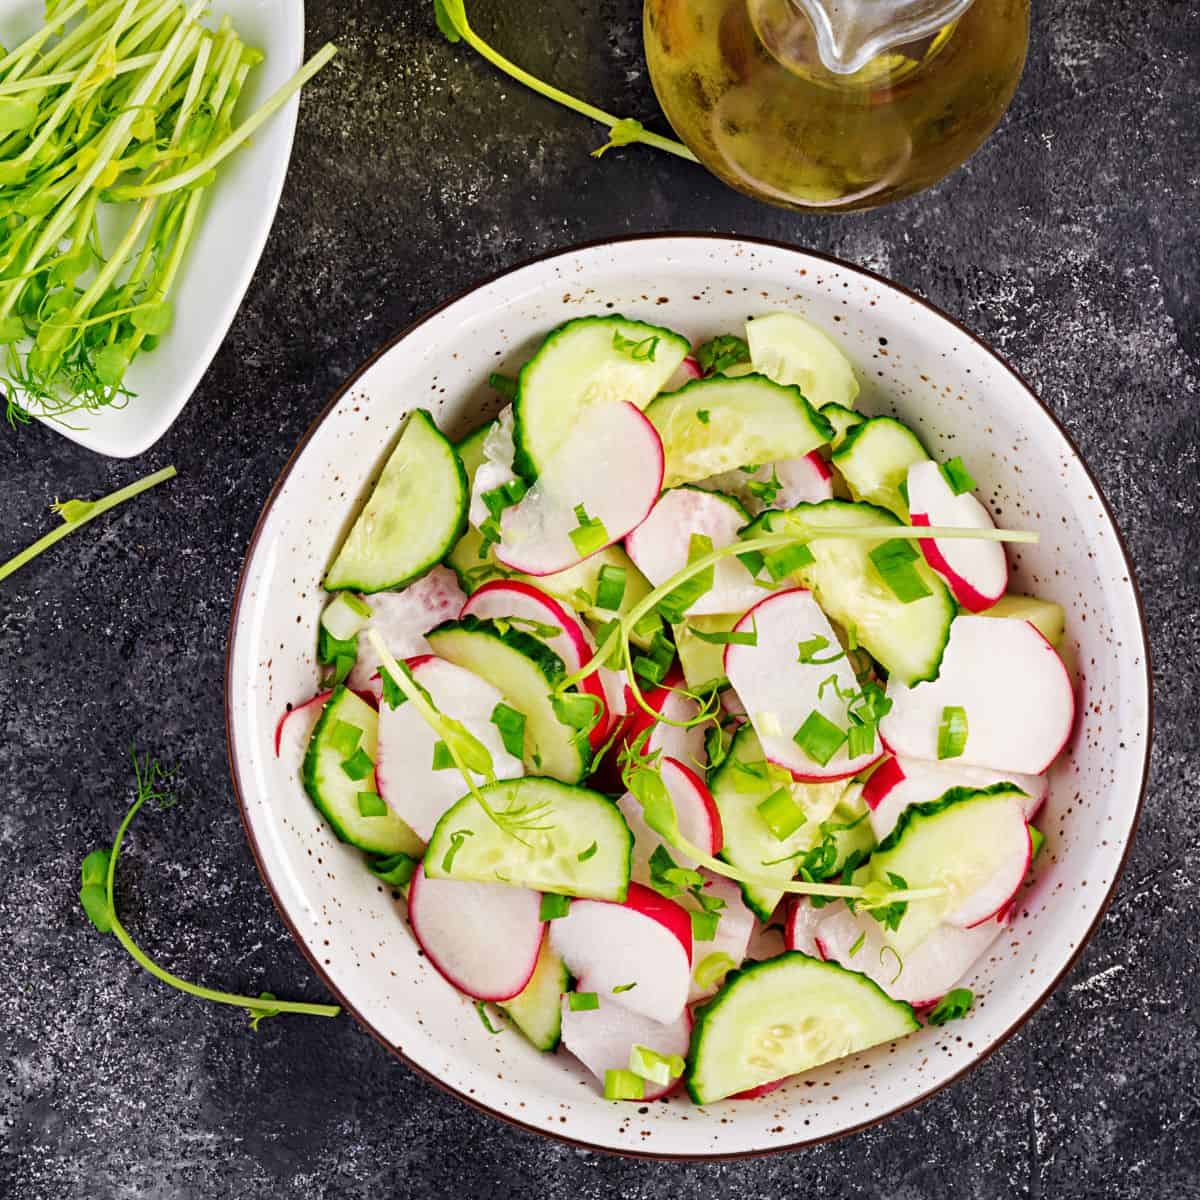 Sliced cucumbers with sliced radishes in a white bowl.